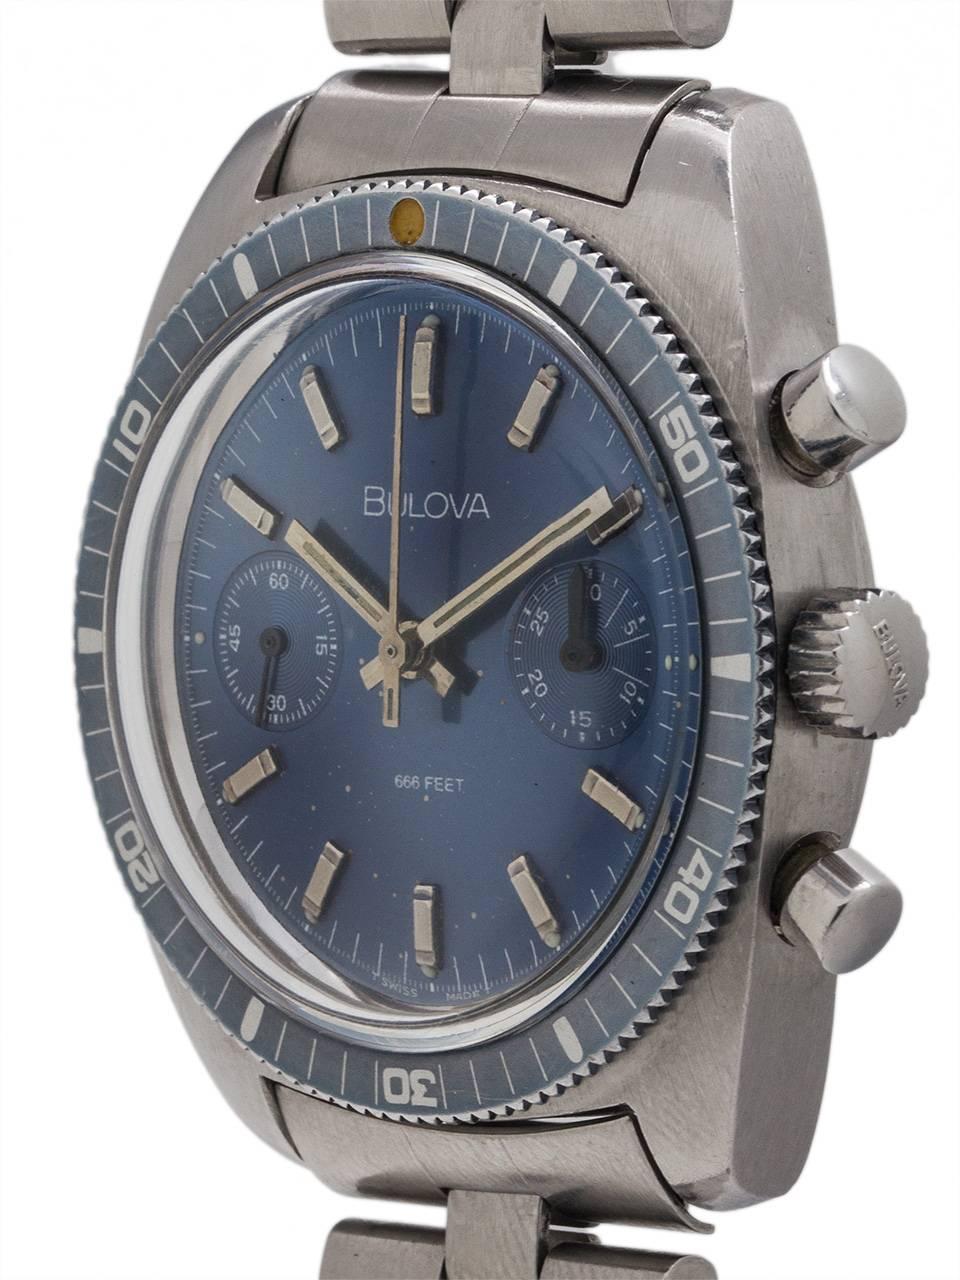 Oversize cushion shaped case Bulova manual wind diver’s chronograph circa 1960’s. Featuring 38 x 44mm case with wide elapsed time faded blue bezel, acrylic crystal, and blue original dial. With round chronograph pushers, signed Bulova crown, screw